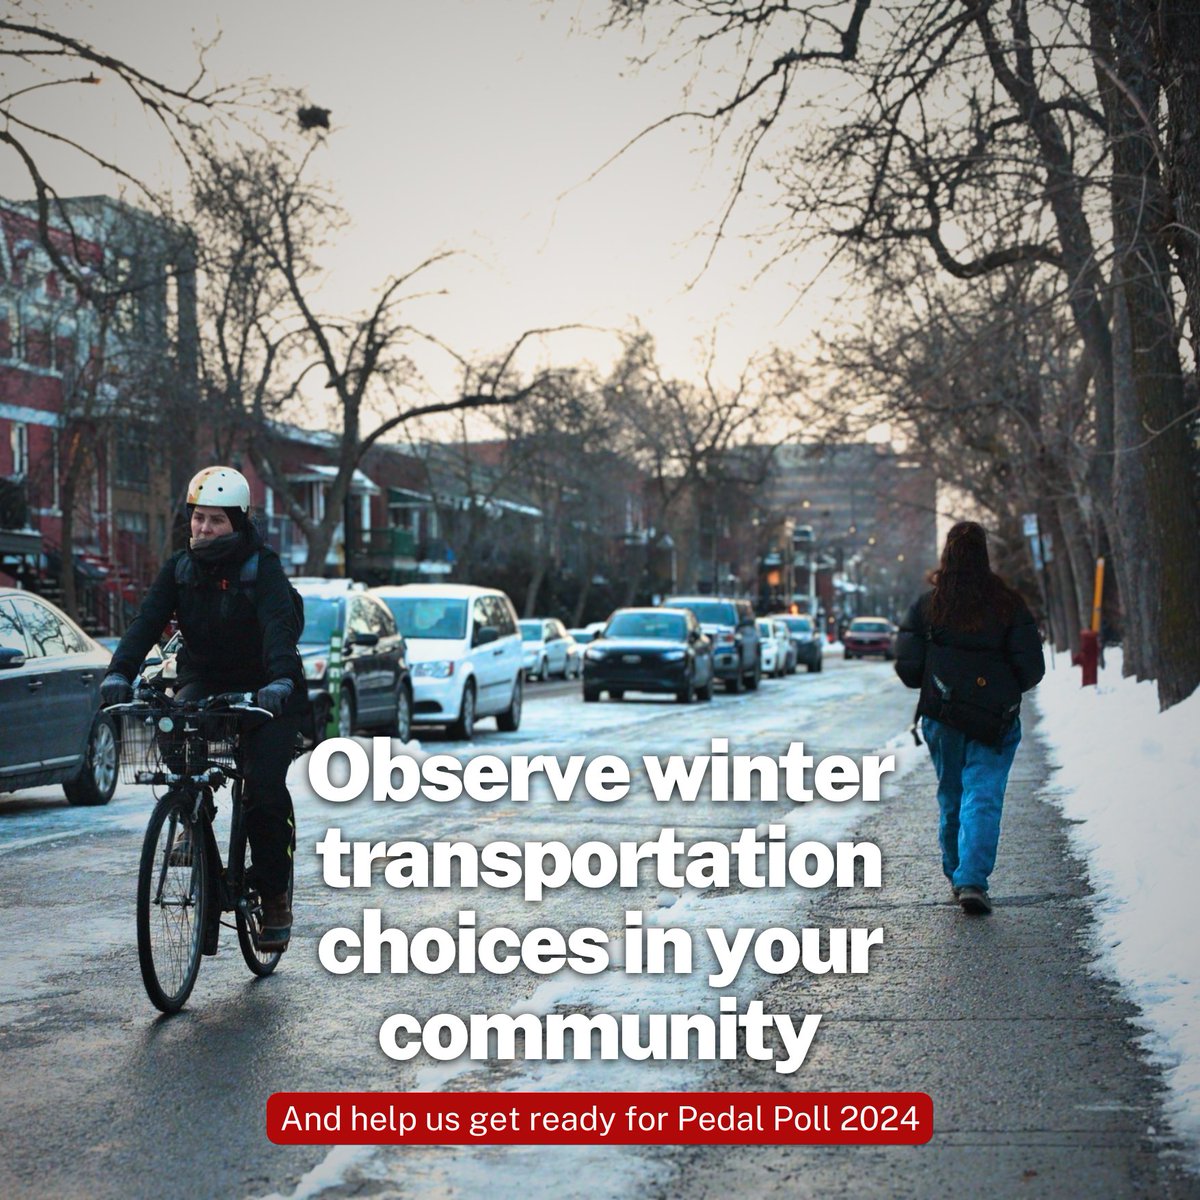 📲 We are recruiting volunteers & classrooms to go out & observe winter & transportation choices with @counterpointapp to help us prep for #PedalPollSondoVelo 2024. ℹ️ Info + sign up here: velocanadabikes.org/pedalpoll/ 👩🏽‍🎓 Excellent opportunity for secondary + post-secondary classes!